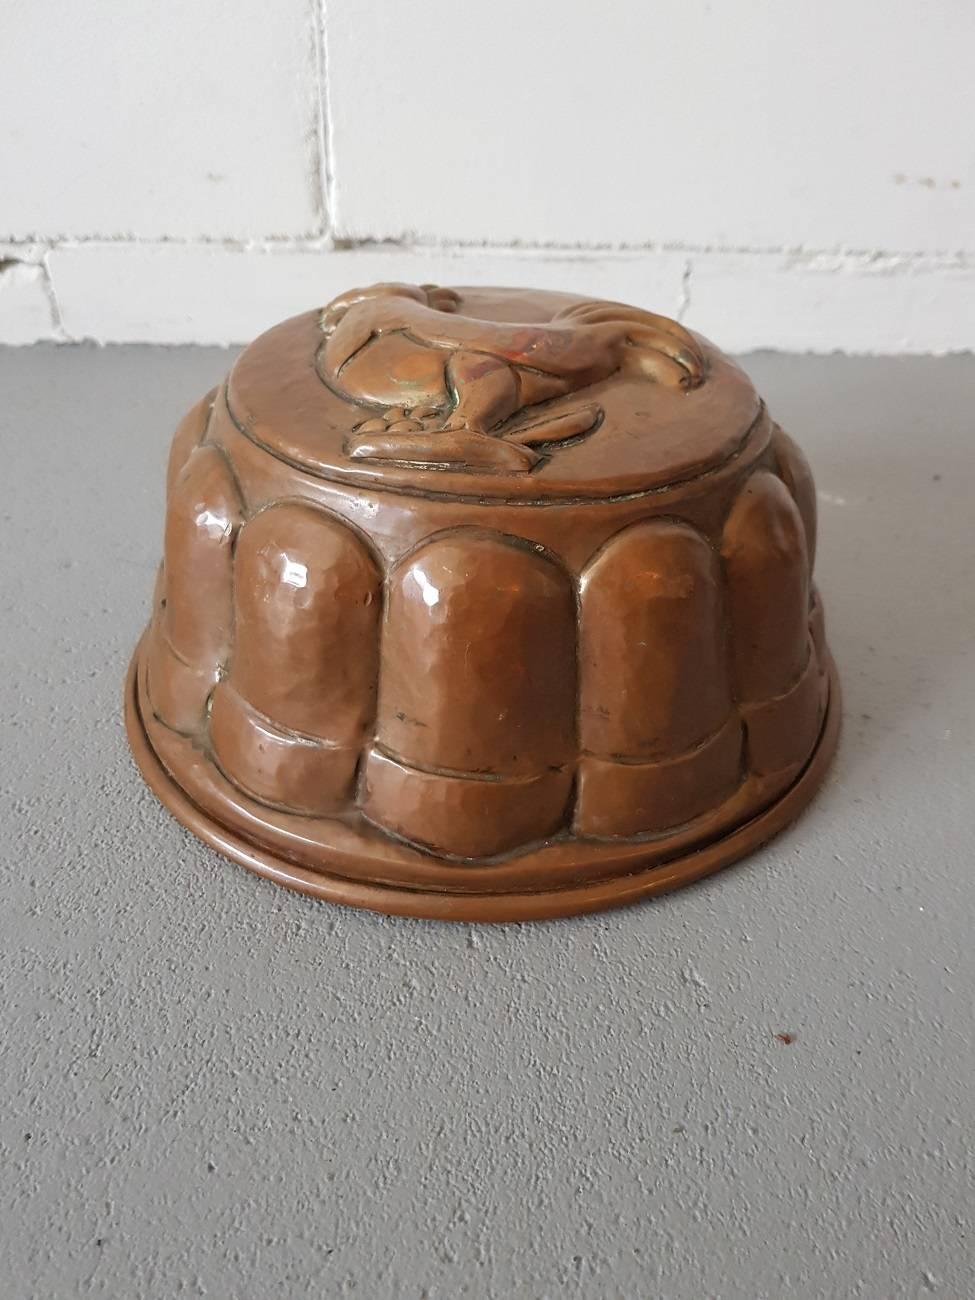 Decorative in any kitchen this 19th century Dutch copper cake mold with tinned inside and picture of a rooster on top.

The measurements are,
Depth 20.5 cm/ 8 inch.
Width 20.5 cm/ 8 inch.
Height 10 cm/ 3.9 inch.
 